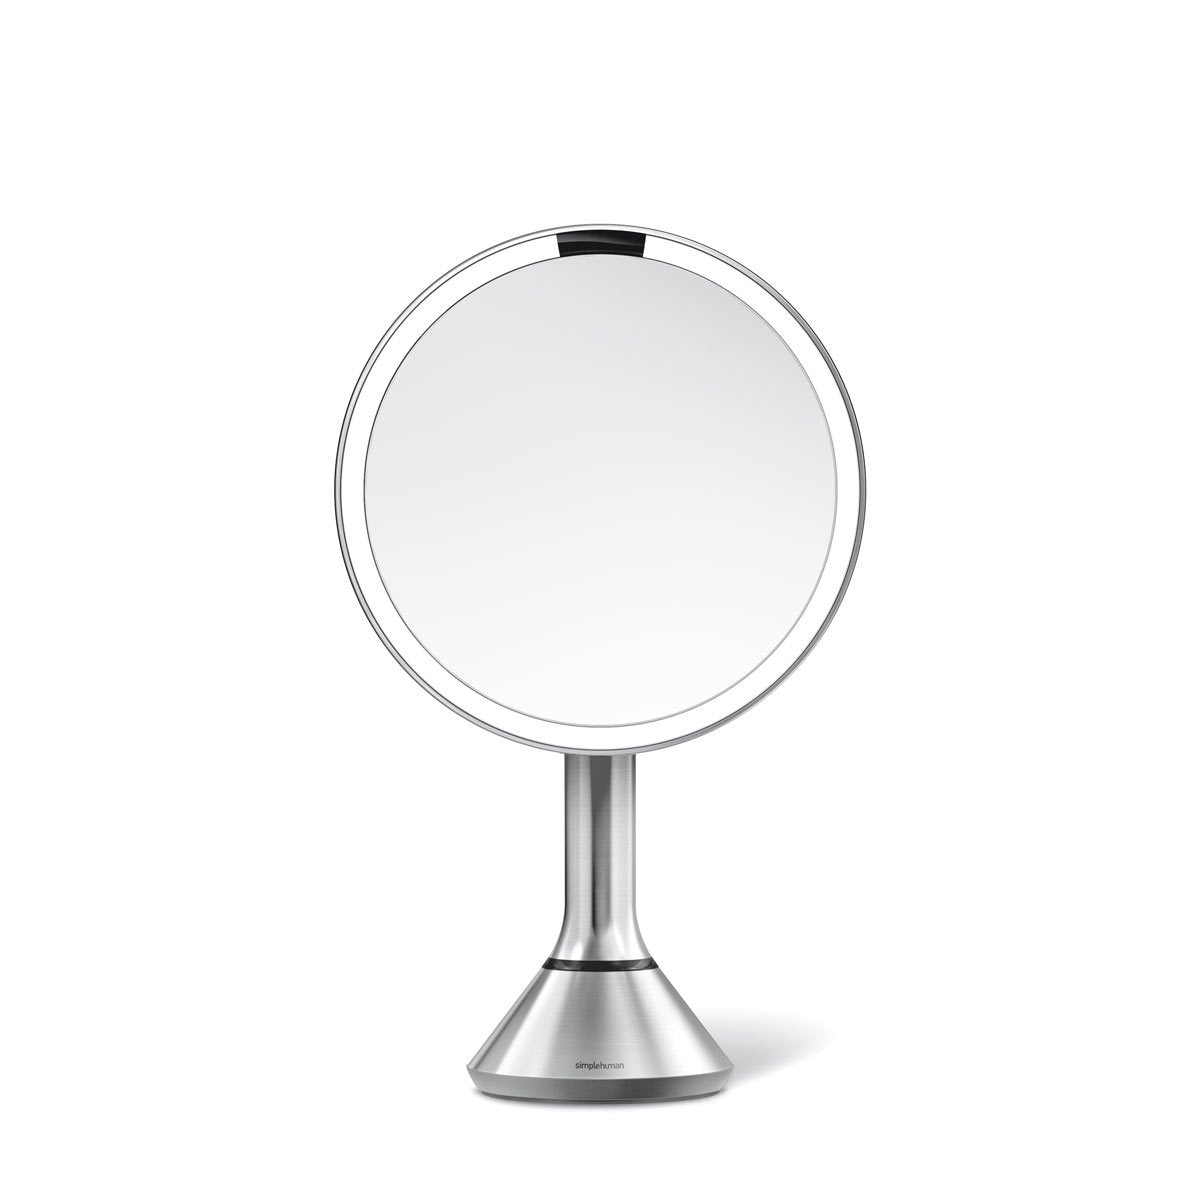 sensor mirror round product support